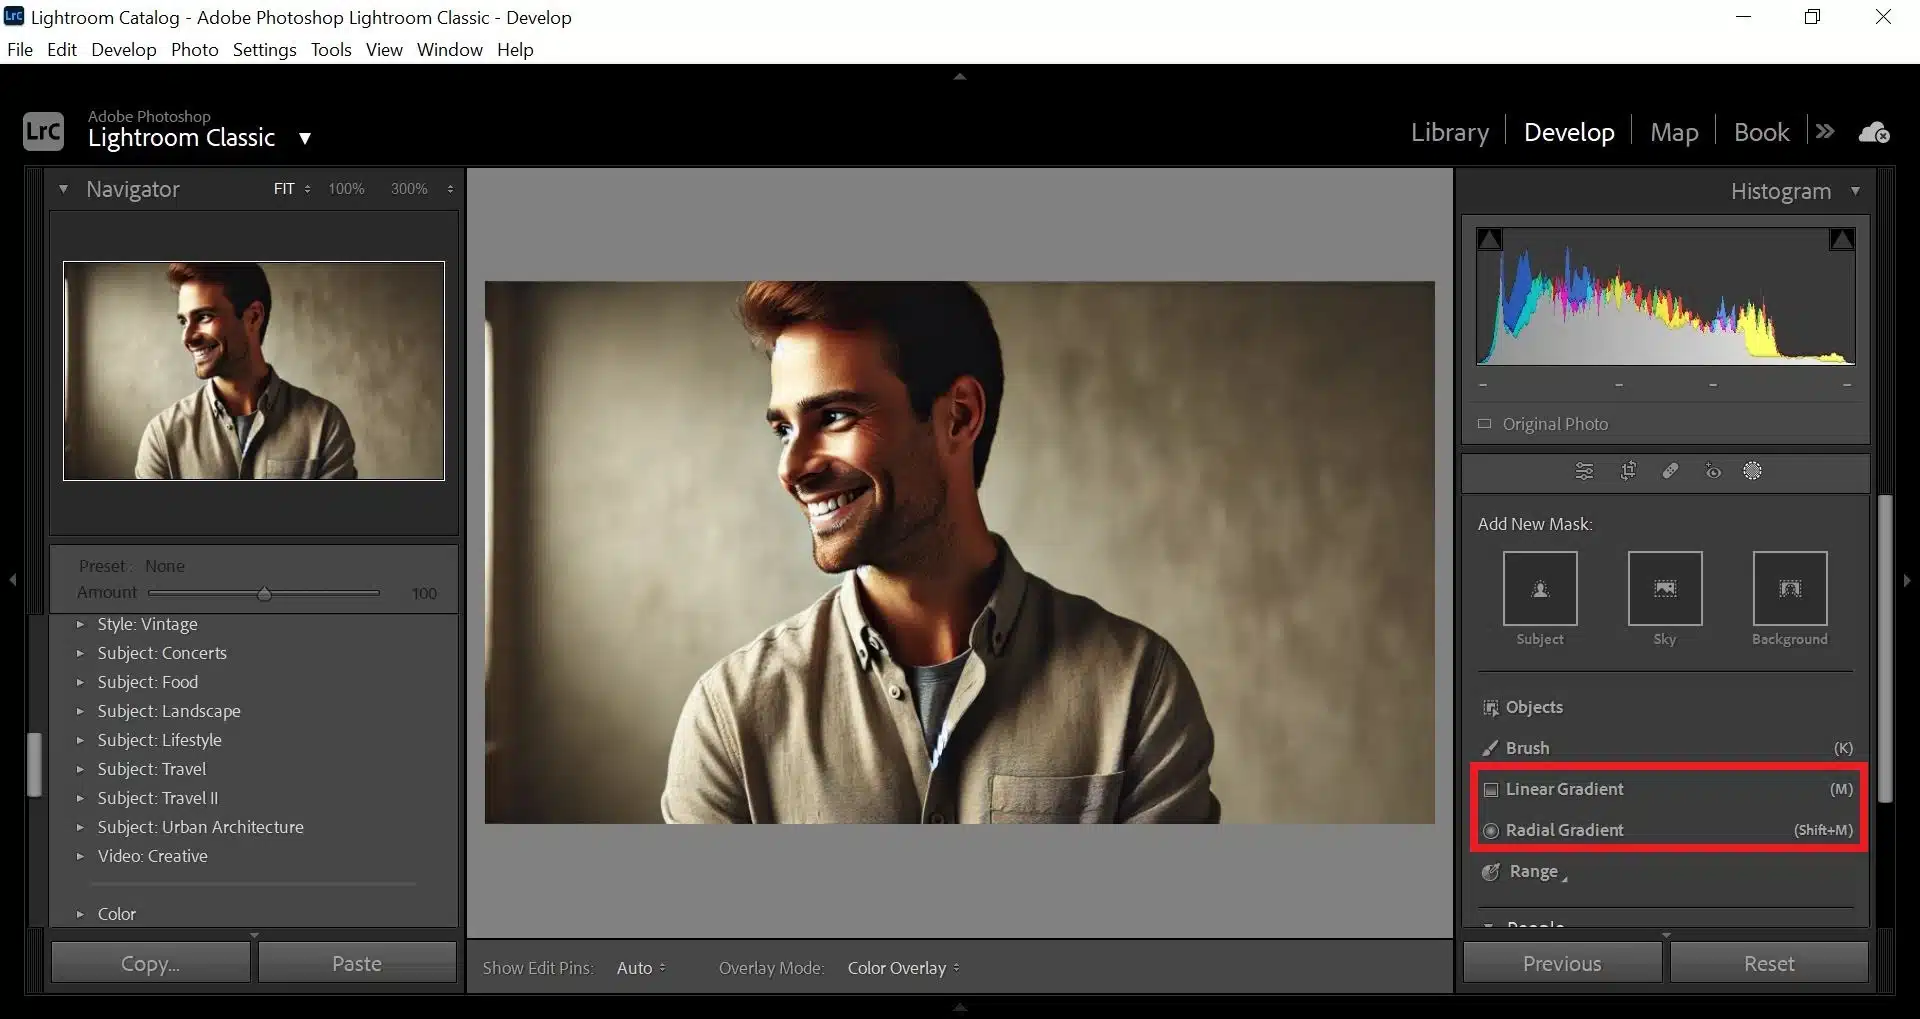 Adobe Lr interface showing a portrait of a smiling man with editing tools visible. The interface includes options for linear gradient and radial gradient adjustments, and a histogram.